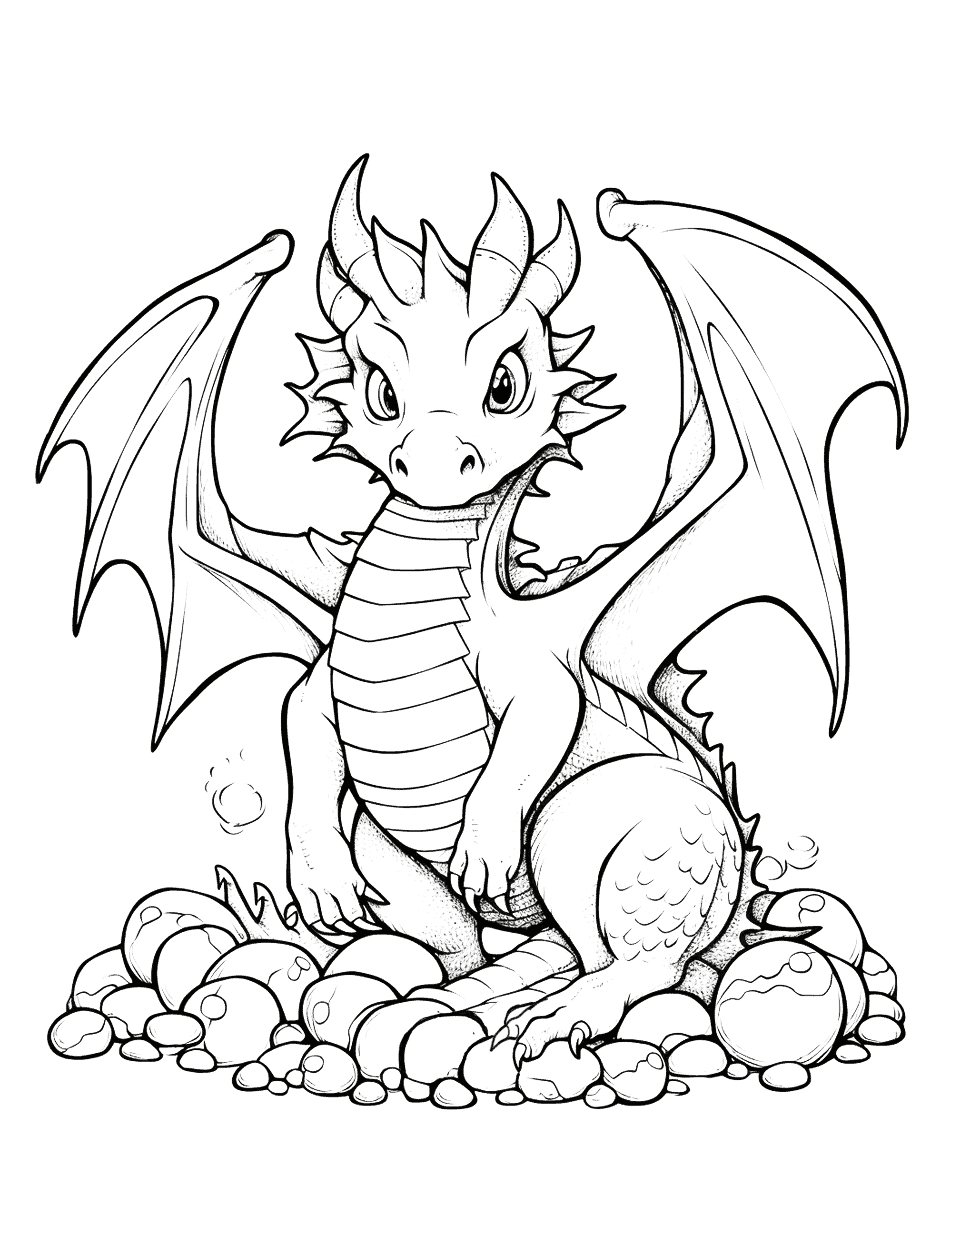 Mythical Dragon Coloring Page - A majestic mythical dragon, surrounded by a hoard of golden treasures.